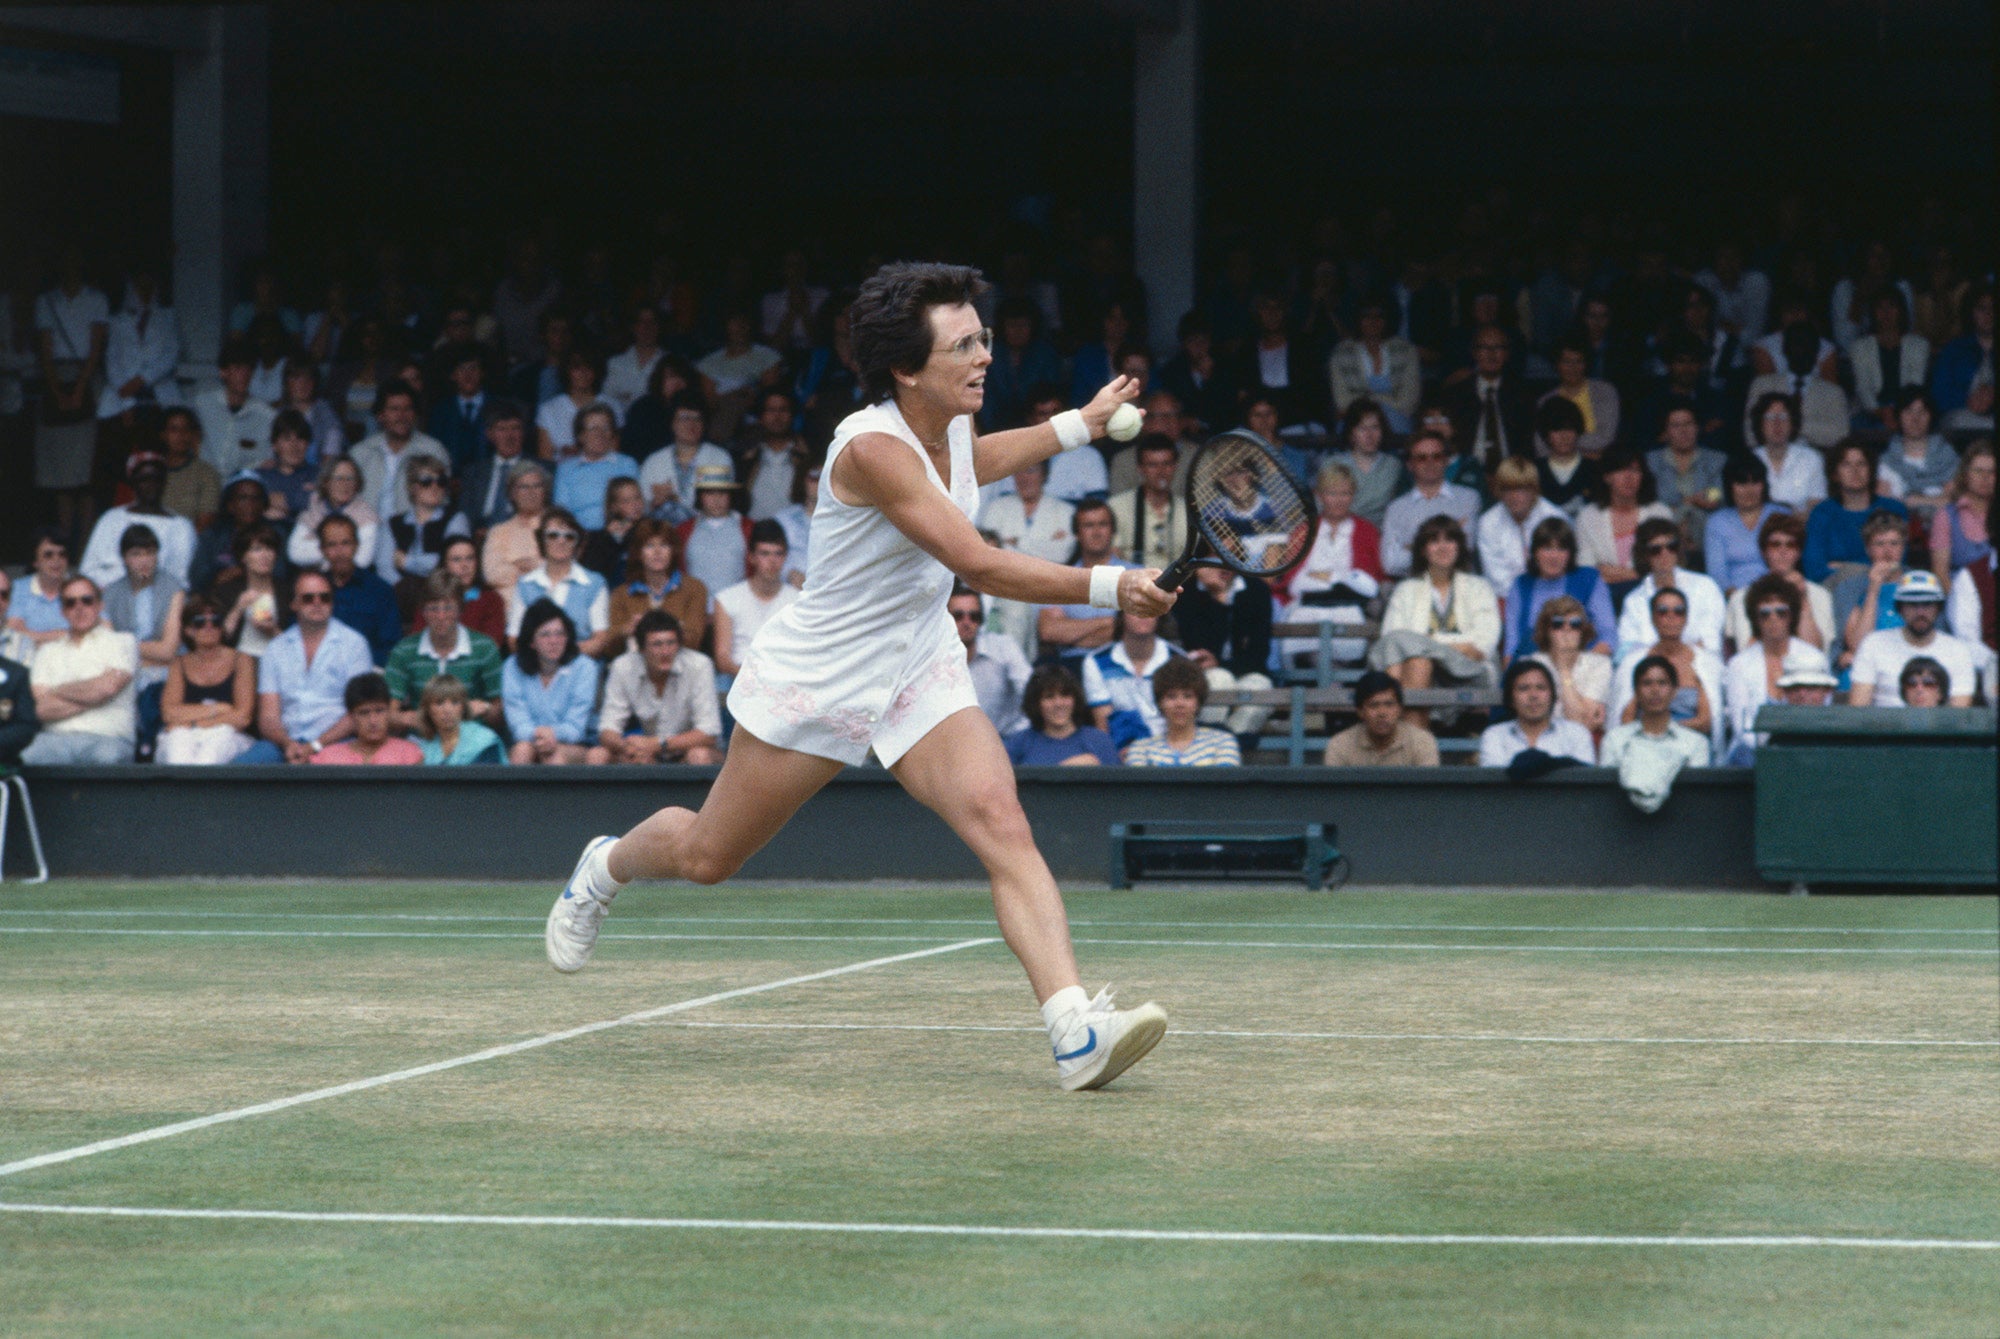 Wimbledon in discussions about changing its all-white uniform policy after Billie Jean King reveals it is her pet peeve